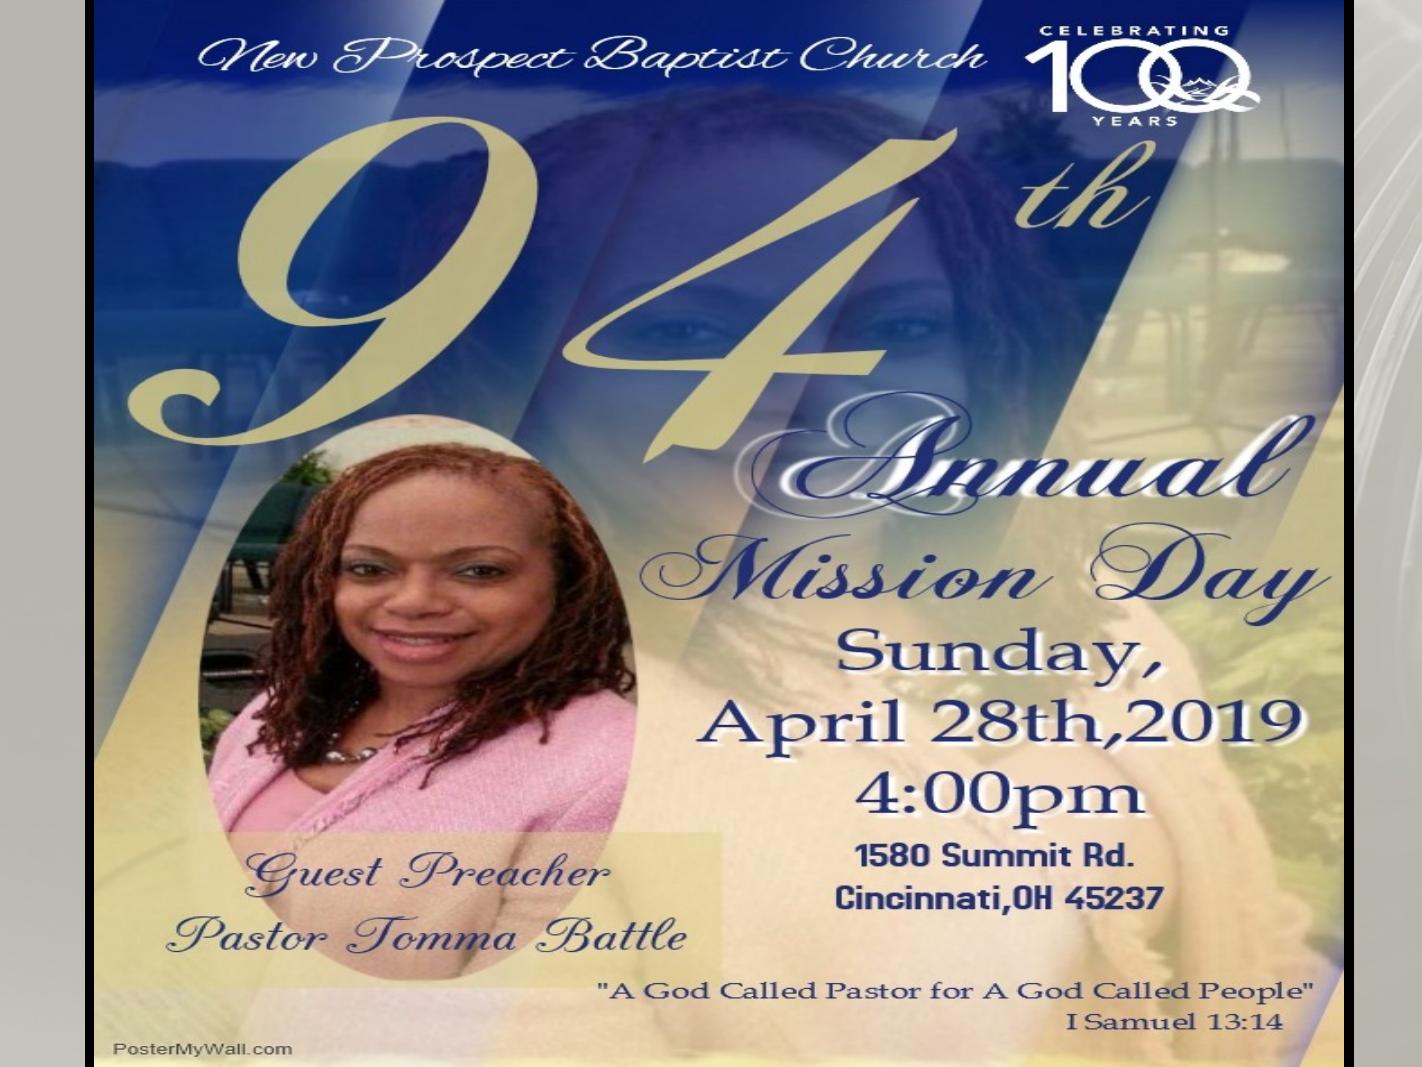 New Prospect Baptist Church 94th Annual Mission Day on Sunday April 28th at 4 p.m.